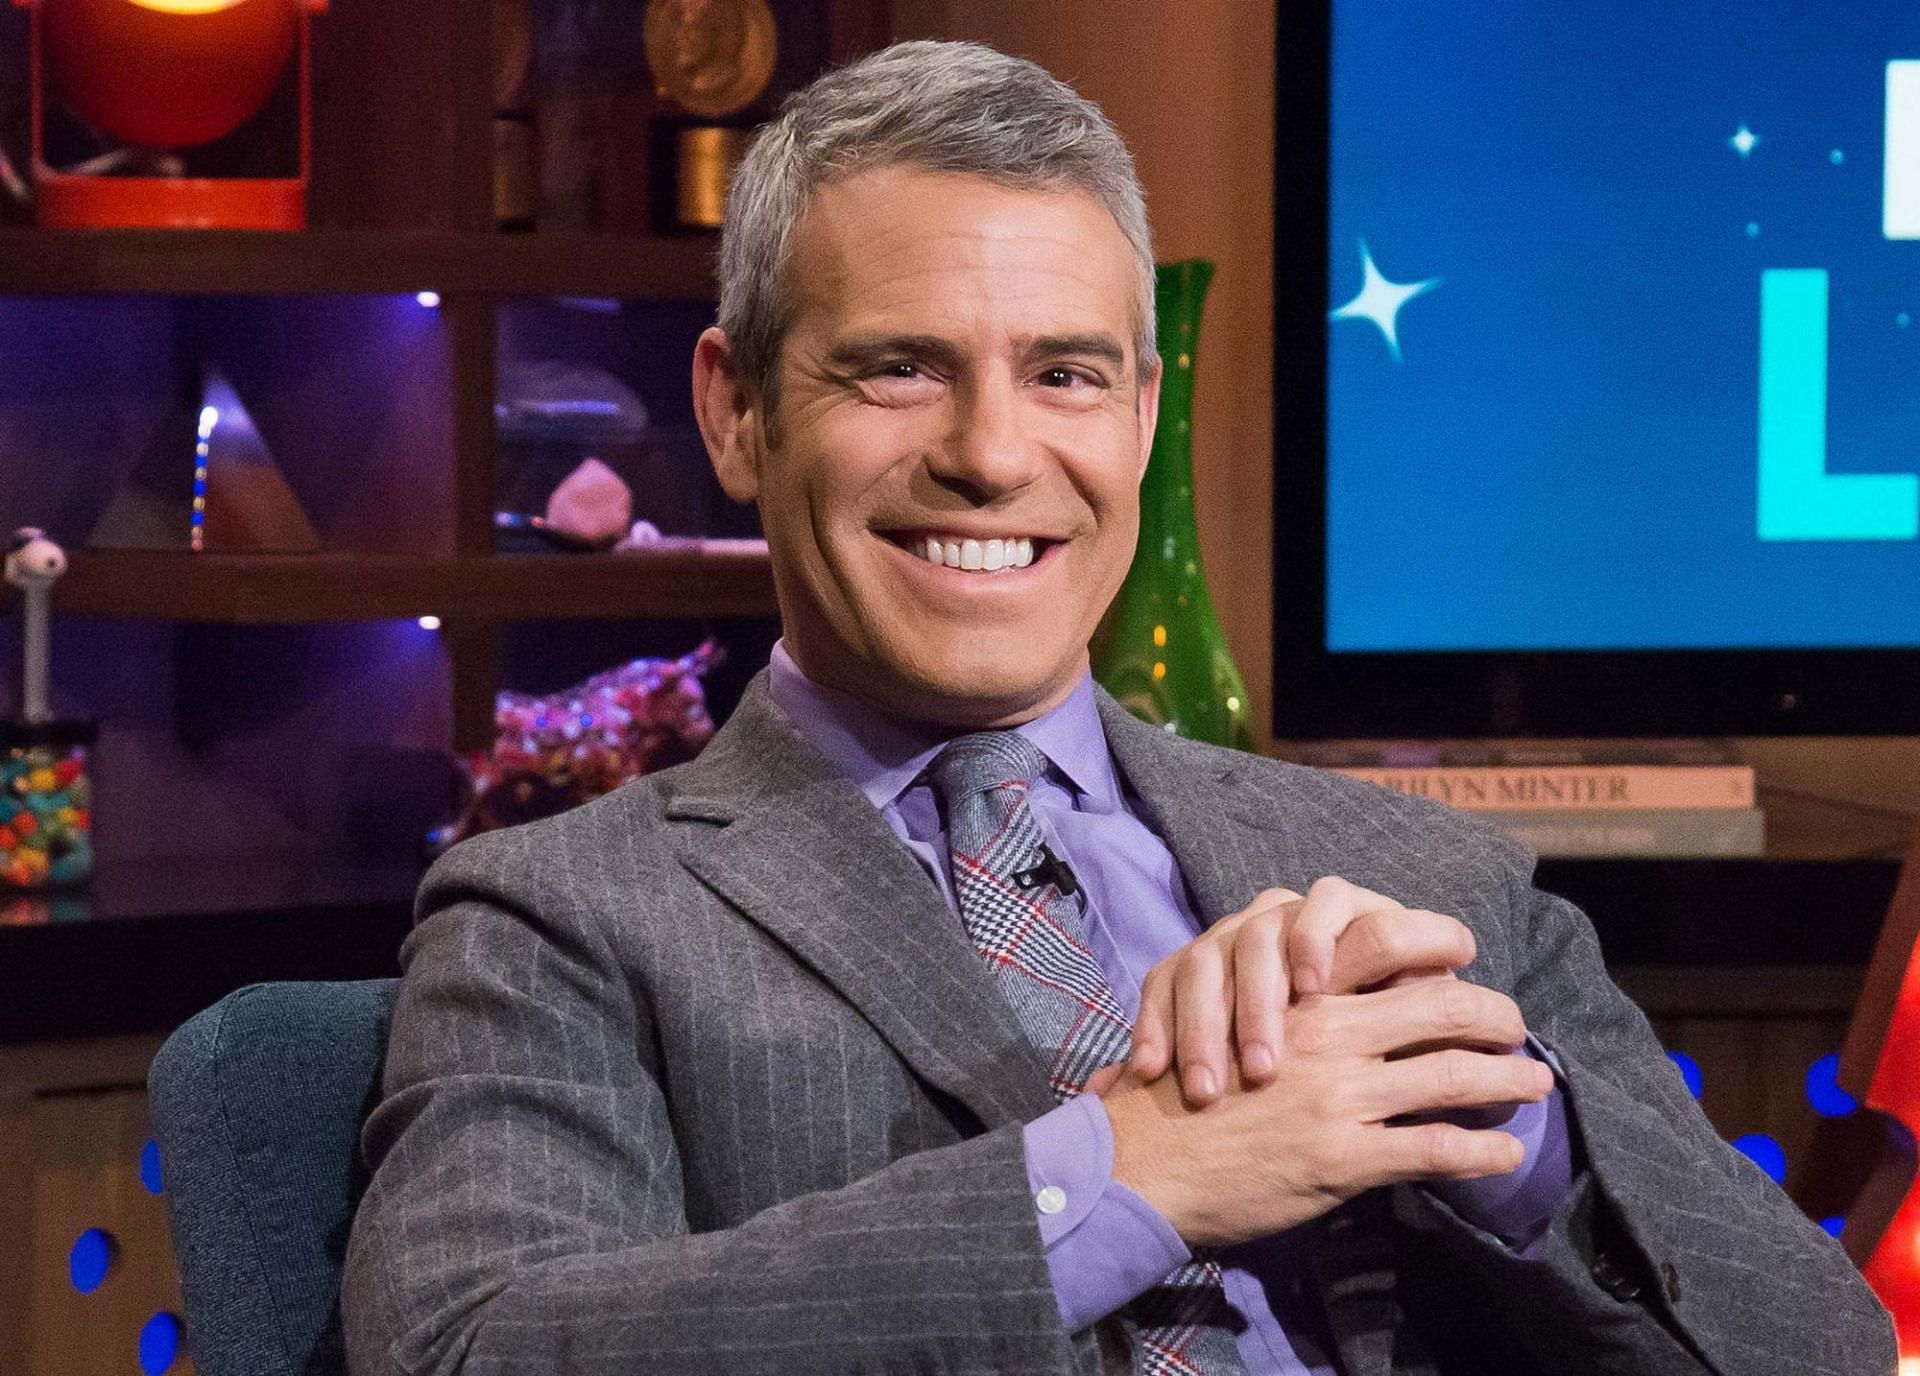 Andy Cohen ranted against former New York City mayor Bill de Blasio while drunk. (Image via Getty Images/ NBCU Photo Bank)